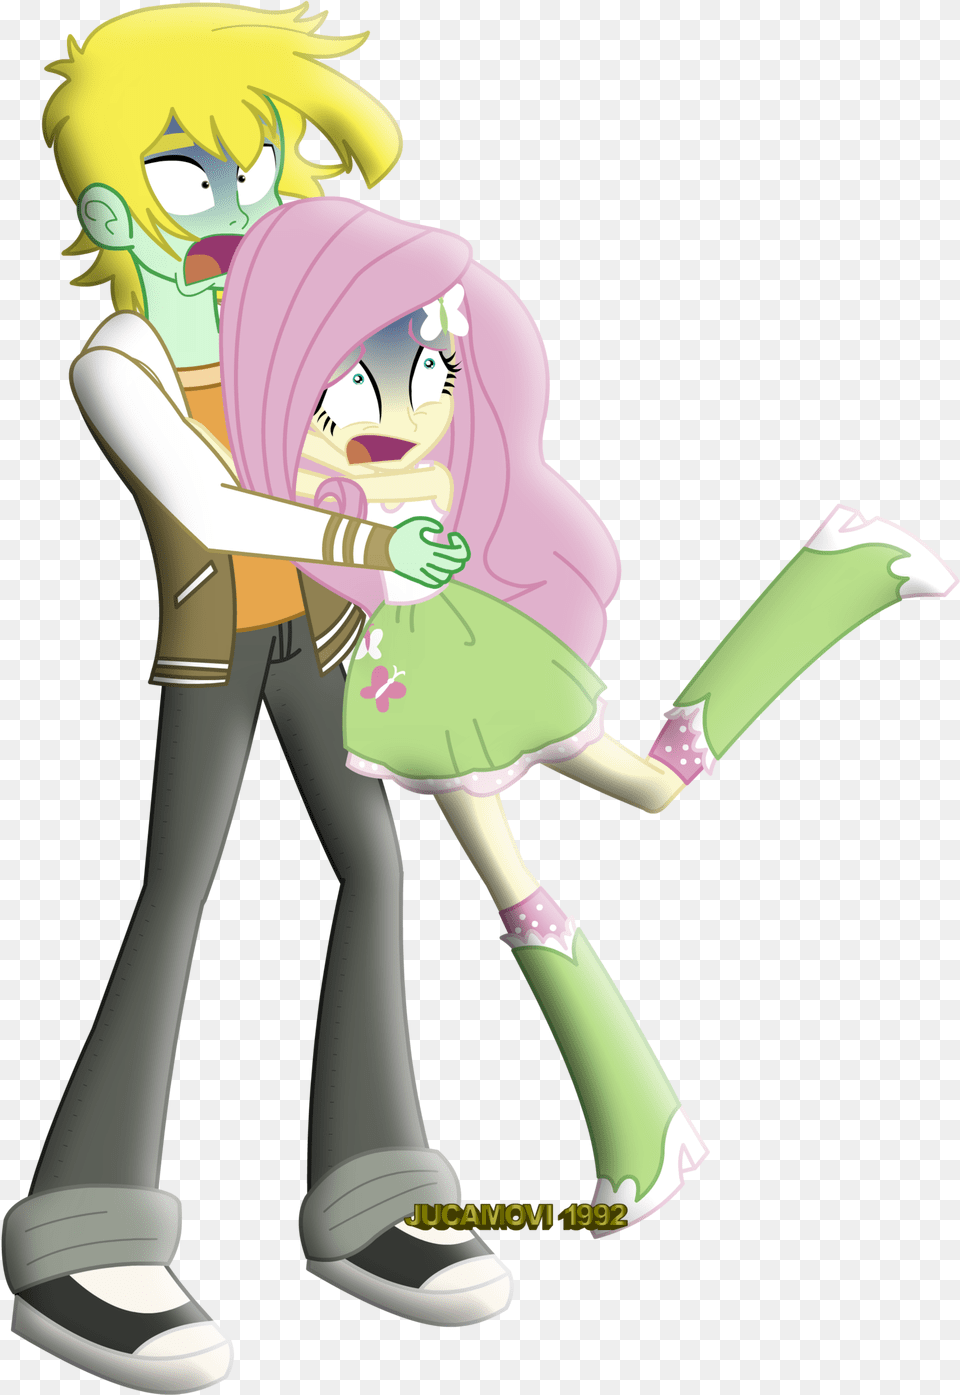 Speed And Fluttershy Scared By Jucamovi1992 Speed And Fluttershy Equestria Girl Hug, Book, Comics, Publication, Manga Free Png Download